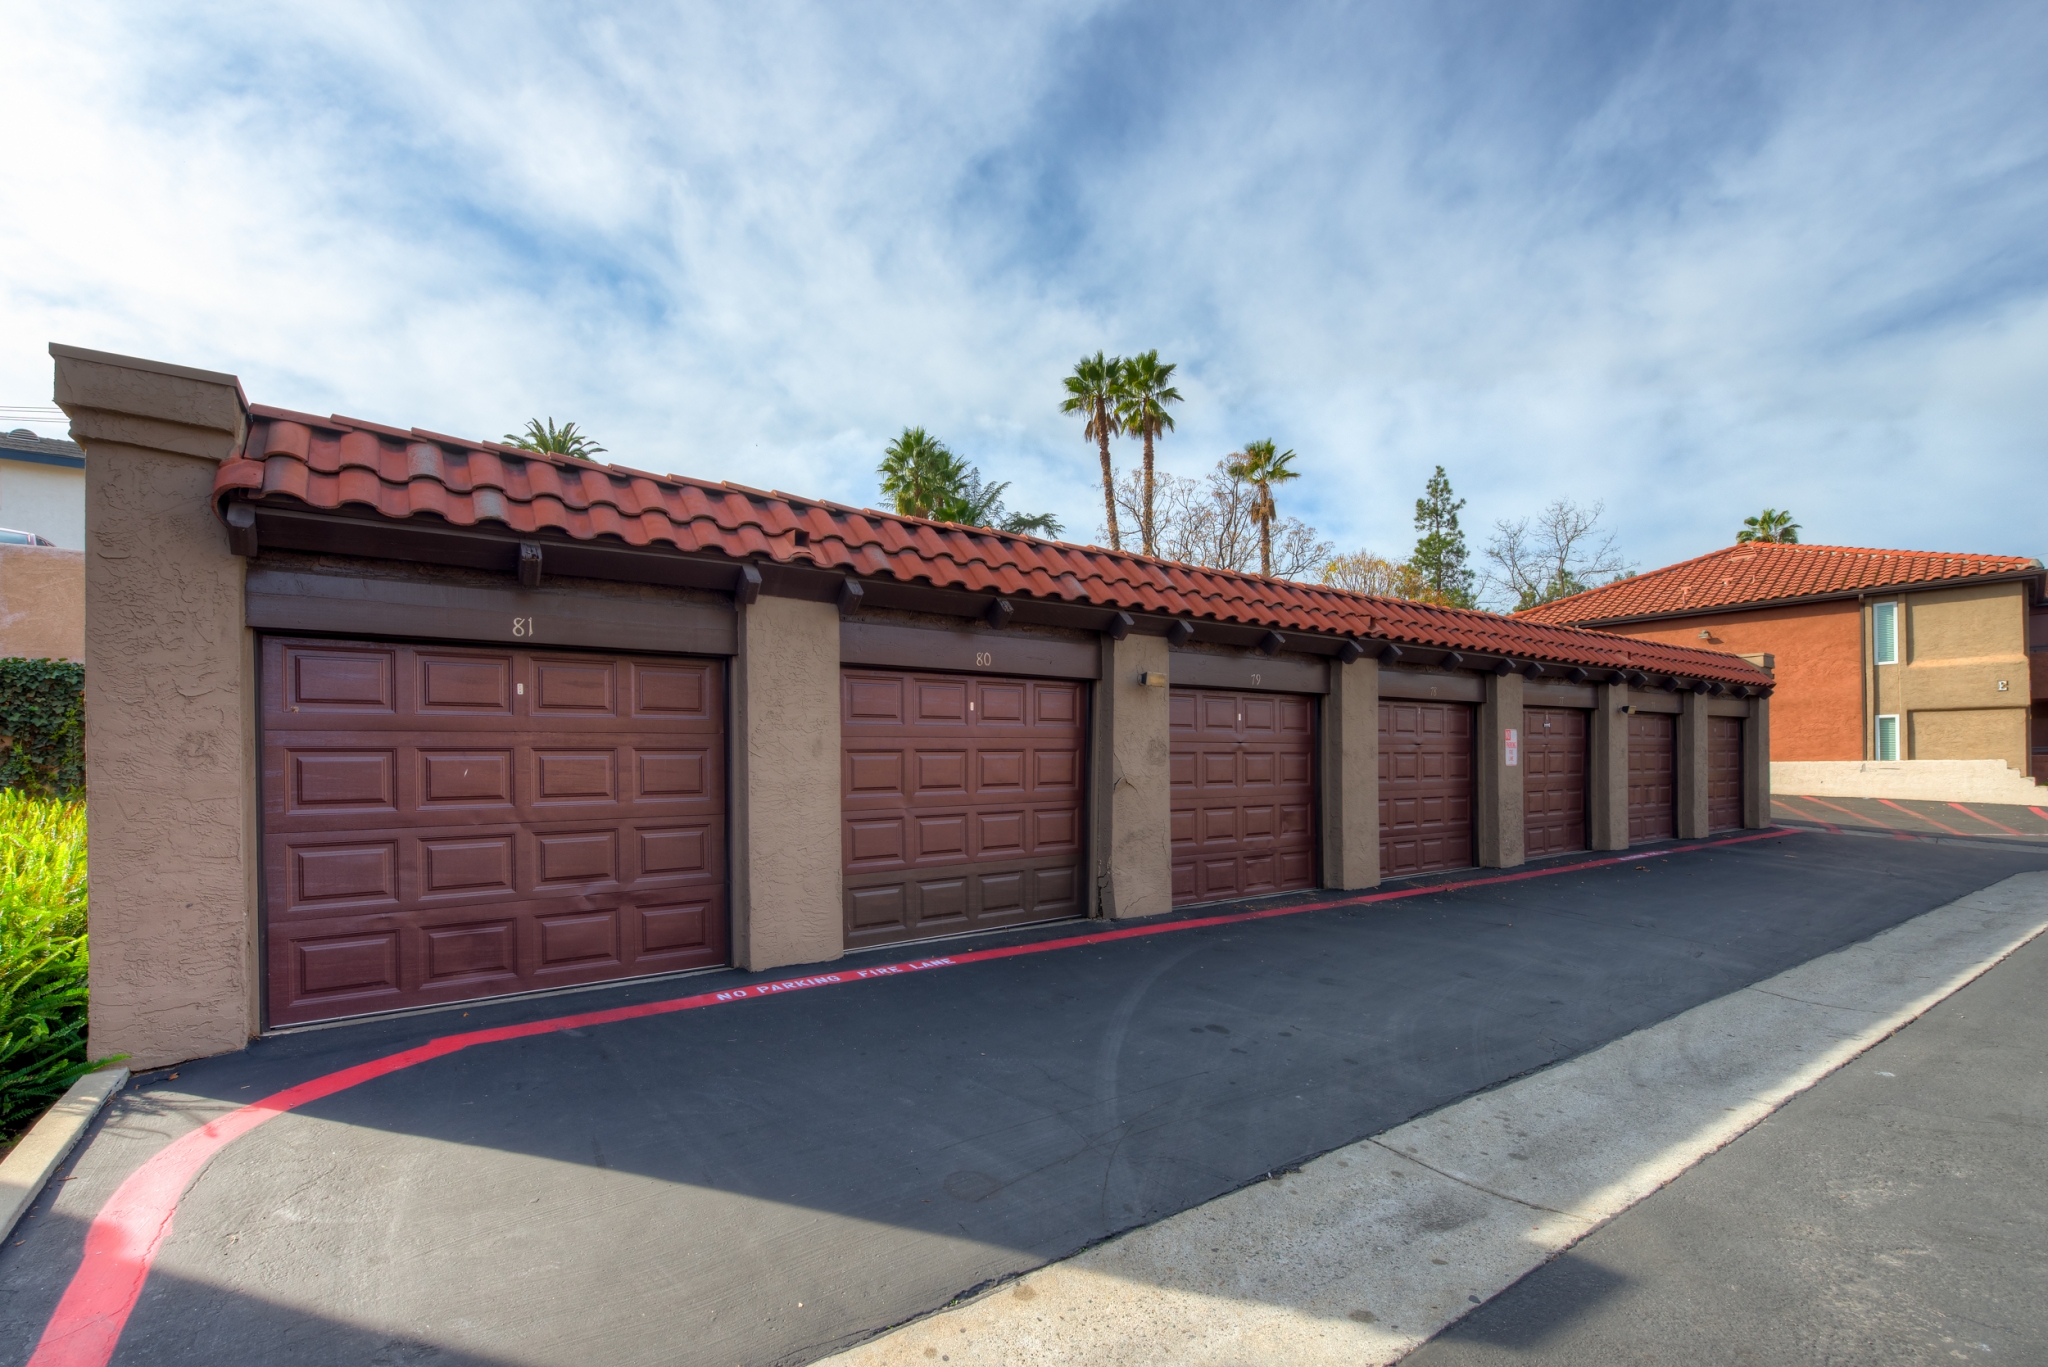 Image of Private Garage for Each Unit for Artesia